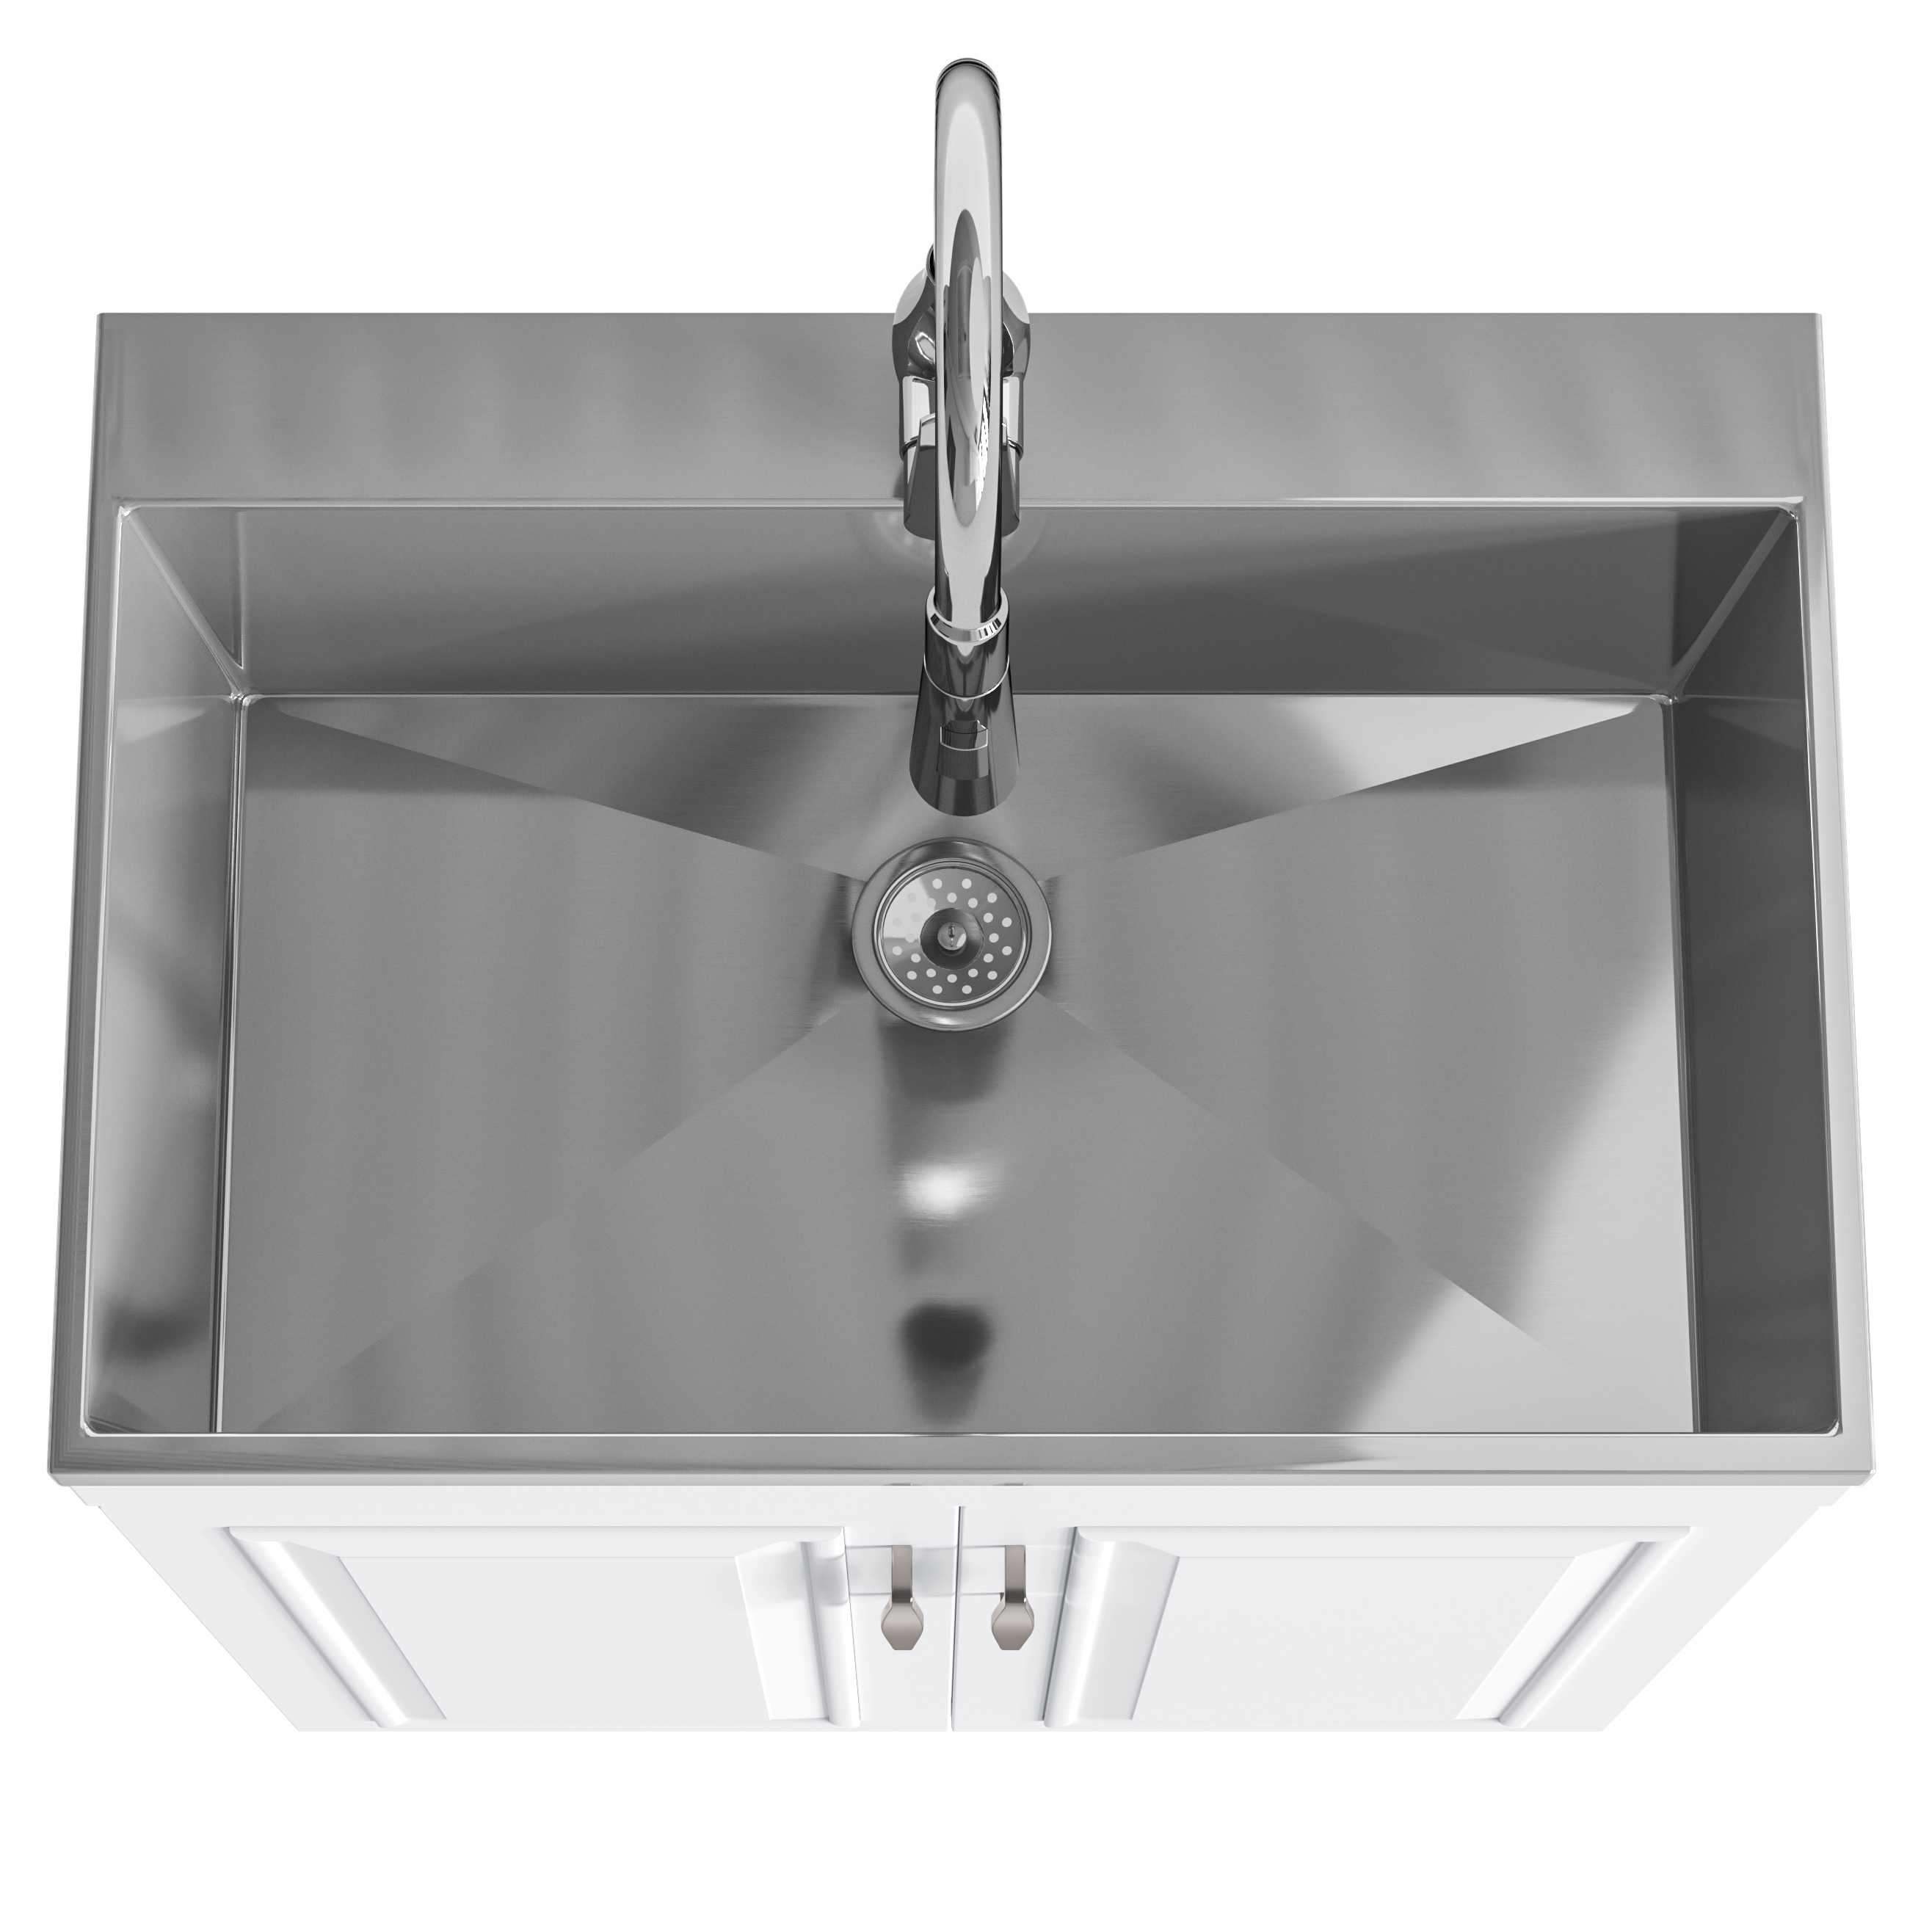 Utility Sink with Cabinet, Stainless Steel Countertop, Interior Shelf - Bed  Bath & Beyond - 37862227